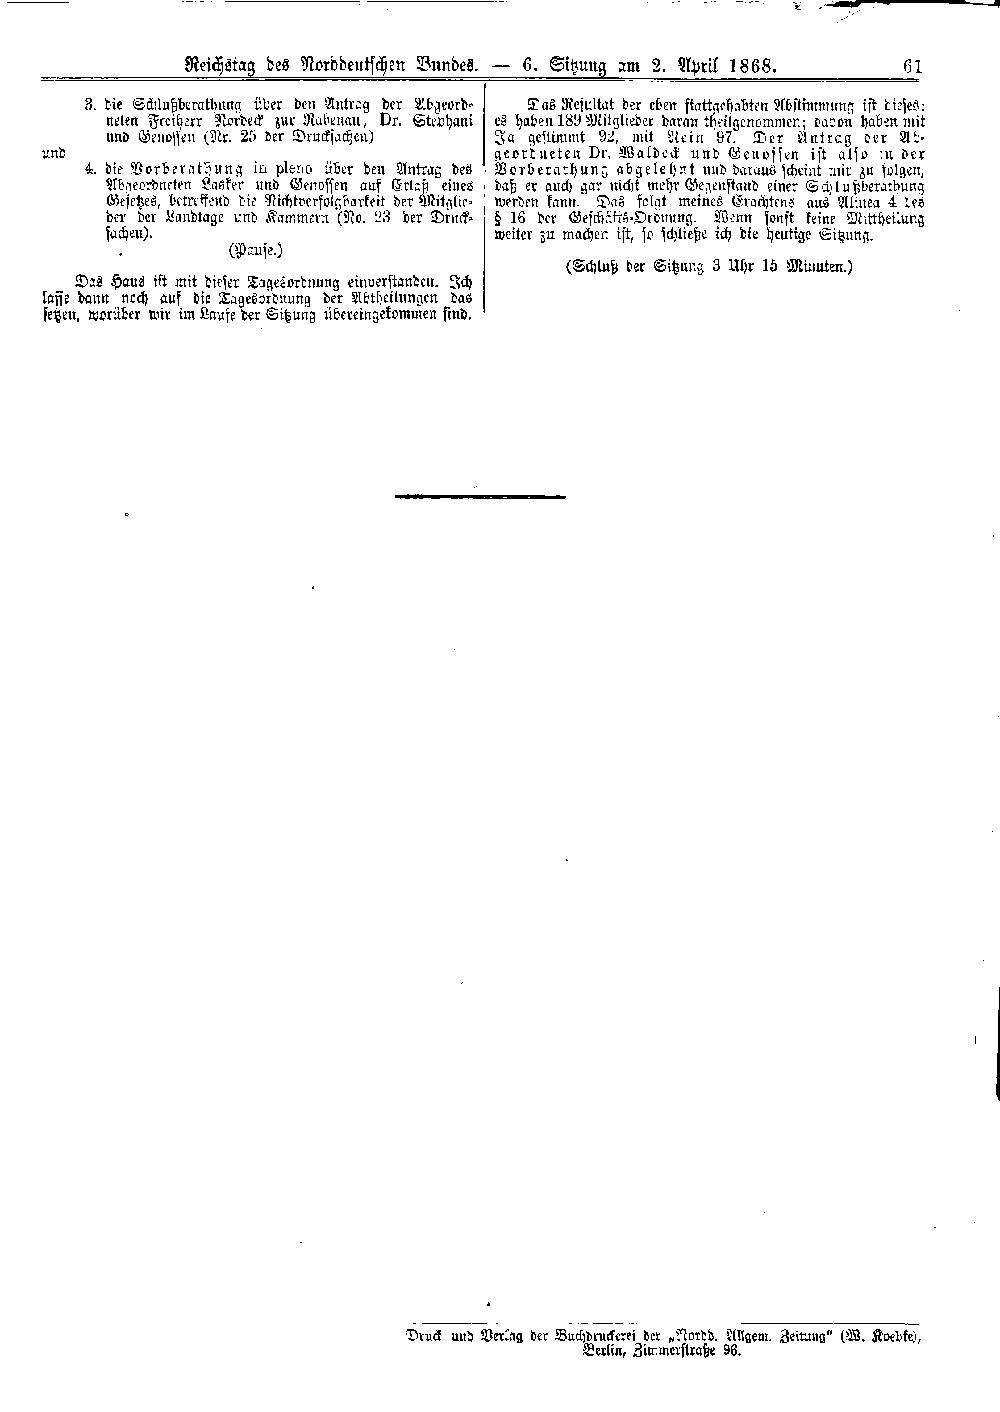 Scan of page 61